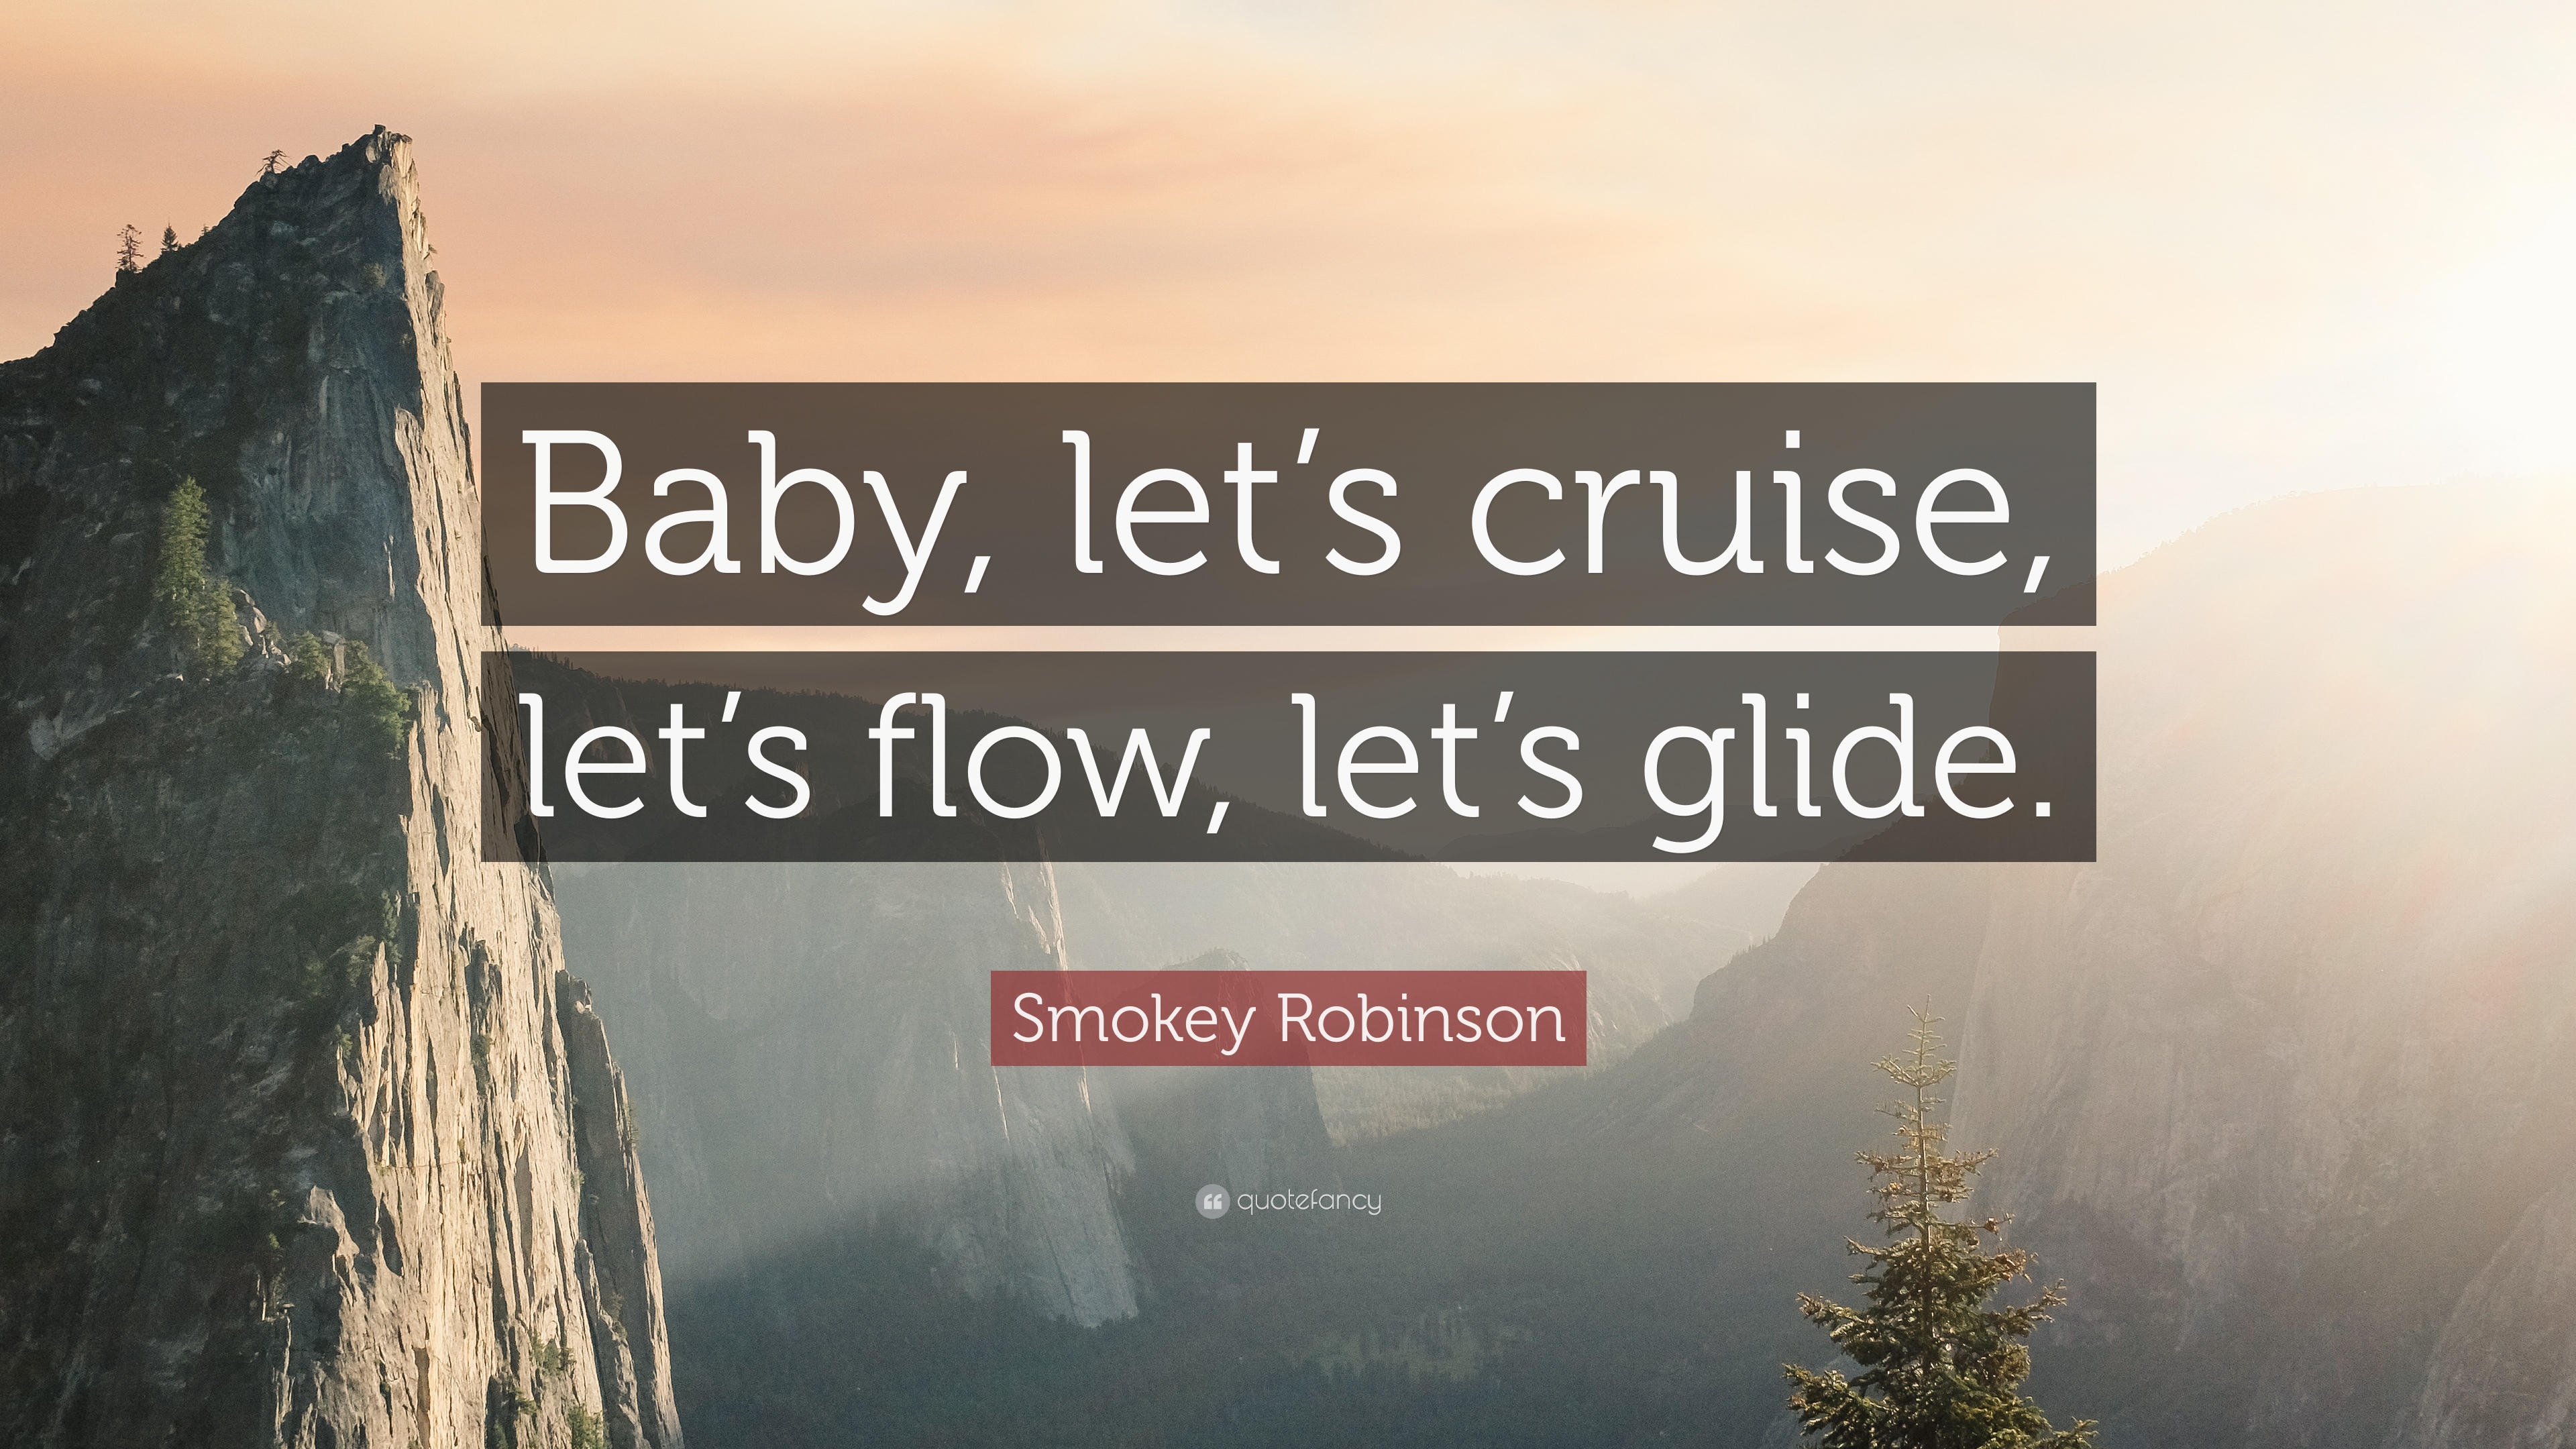 Smokey Robinson Quote: “Baby, let's cruise, let's flow, let's glide